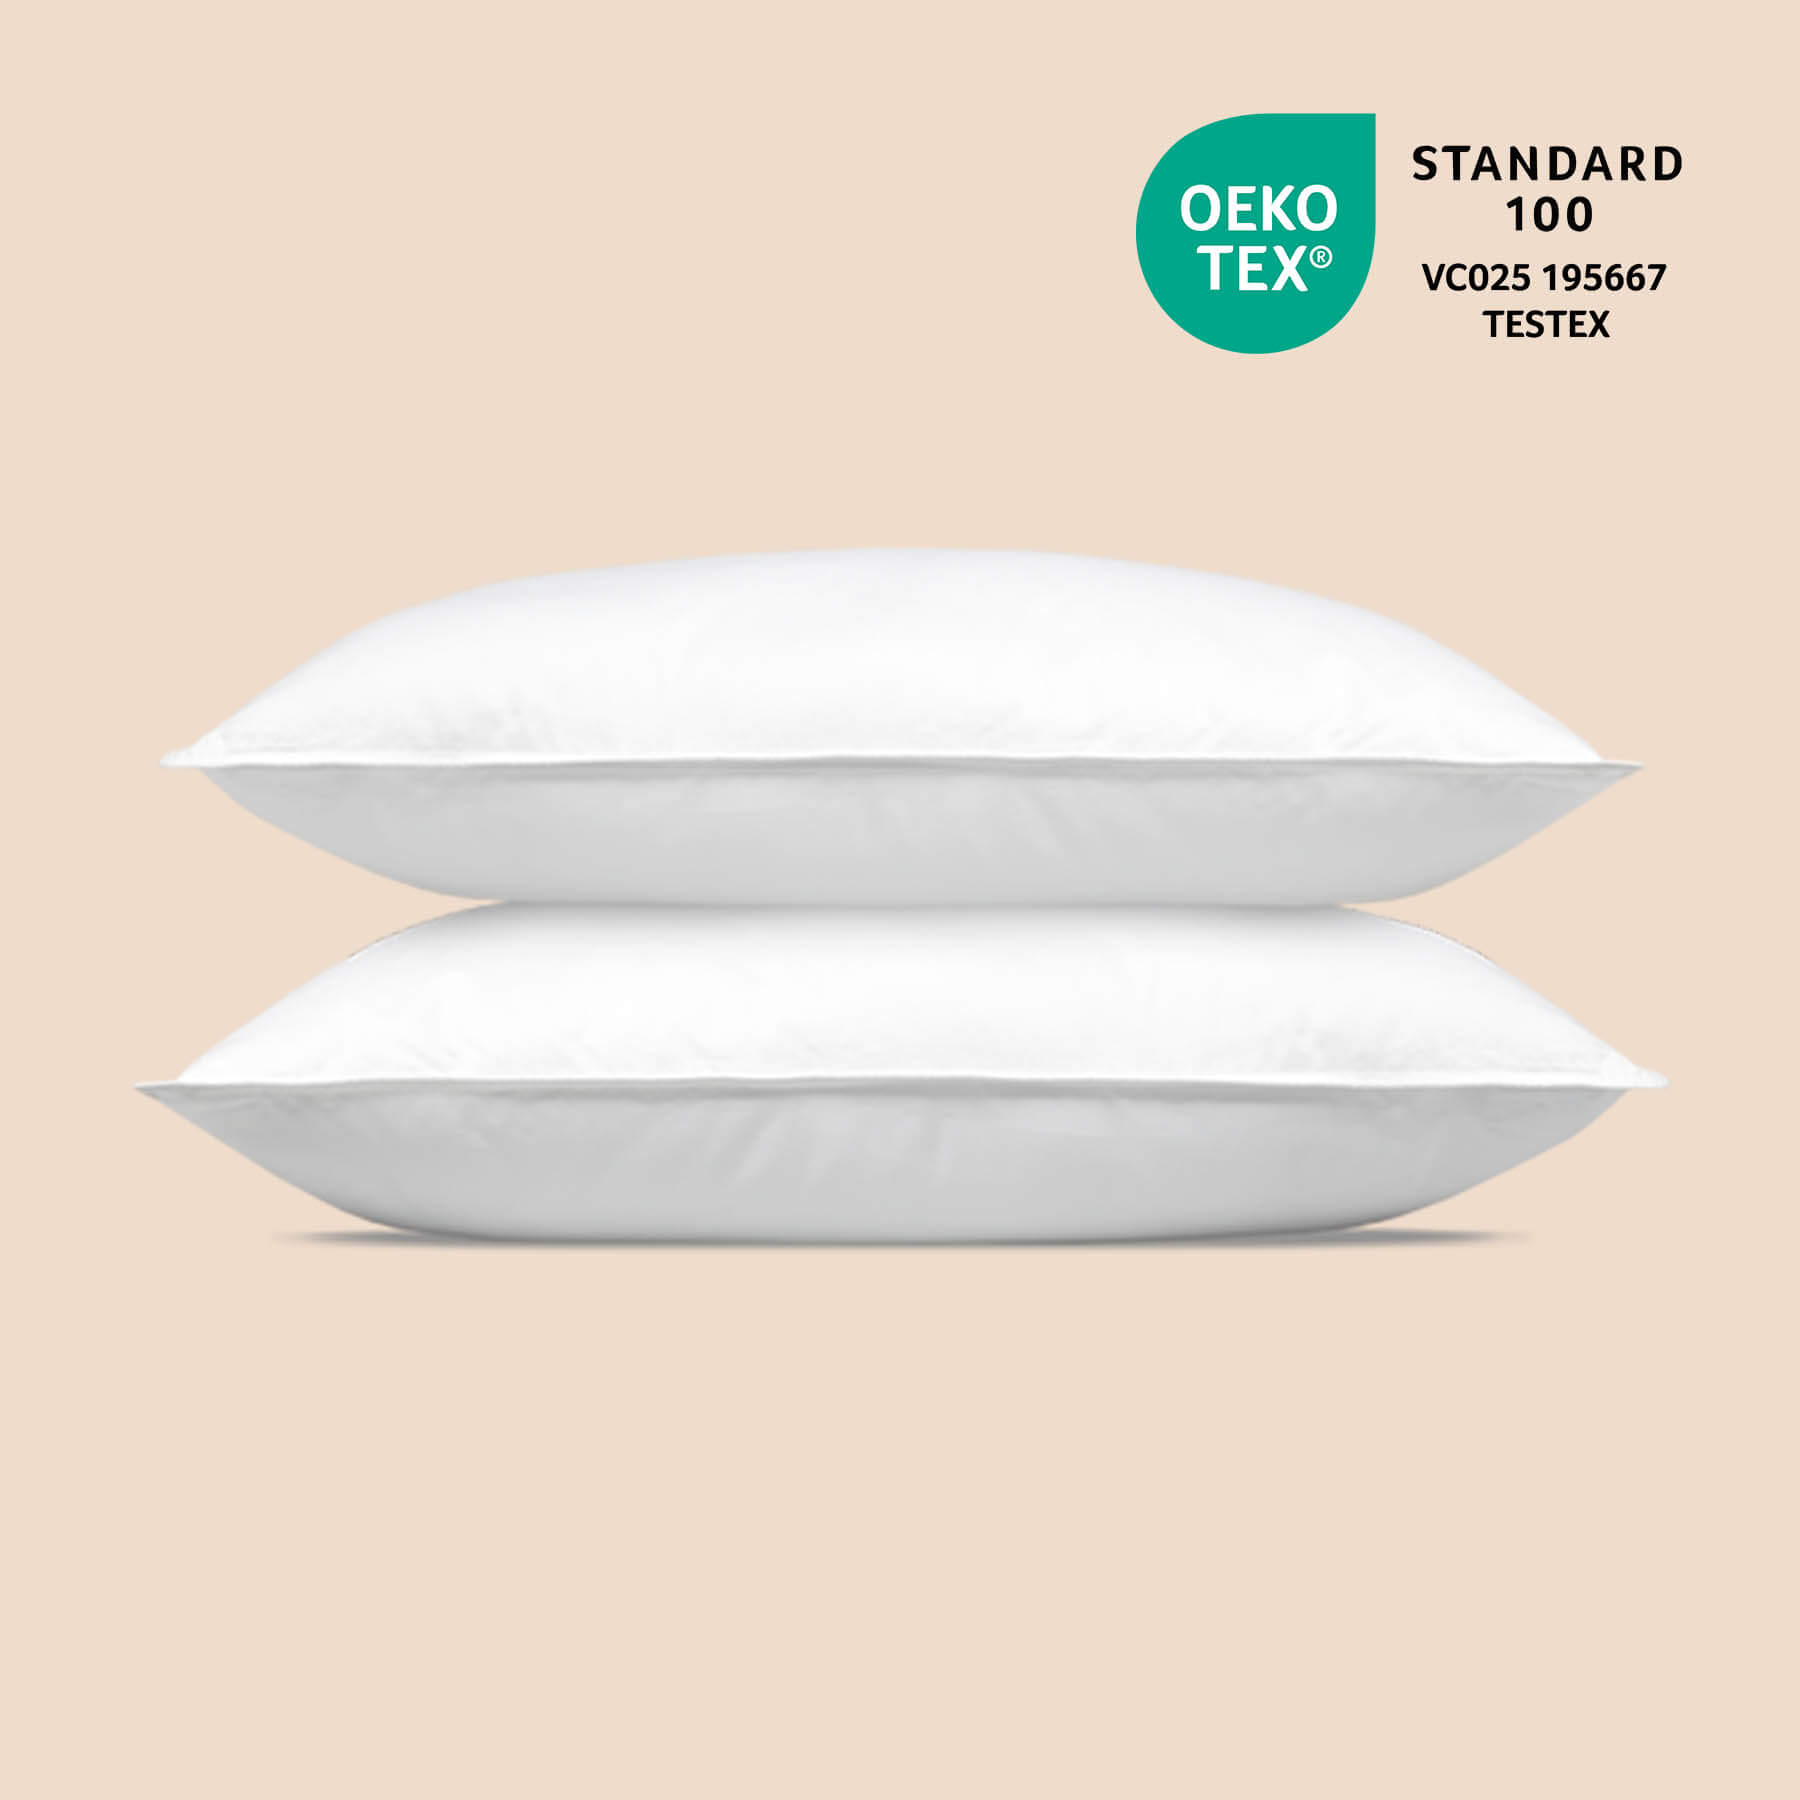 Two Logan & Cove Down Alternative Pillows - with OEKOTEX STANDARD 100 certification